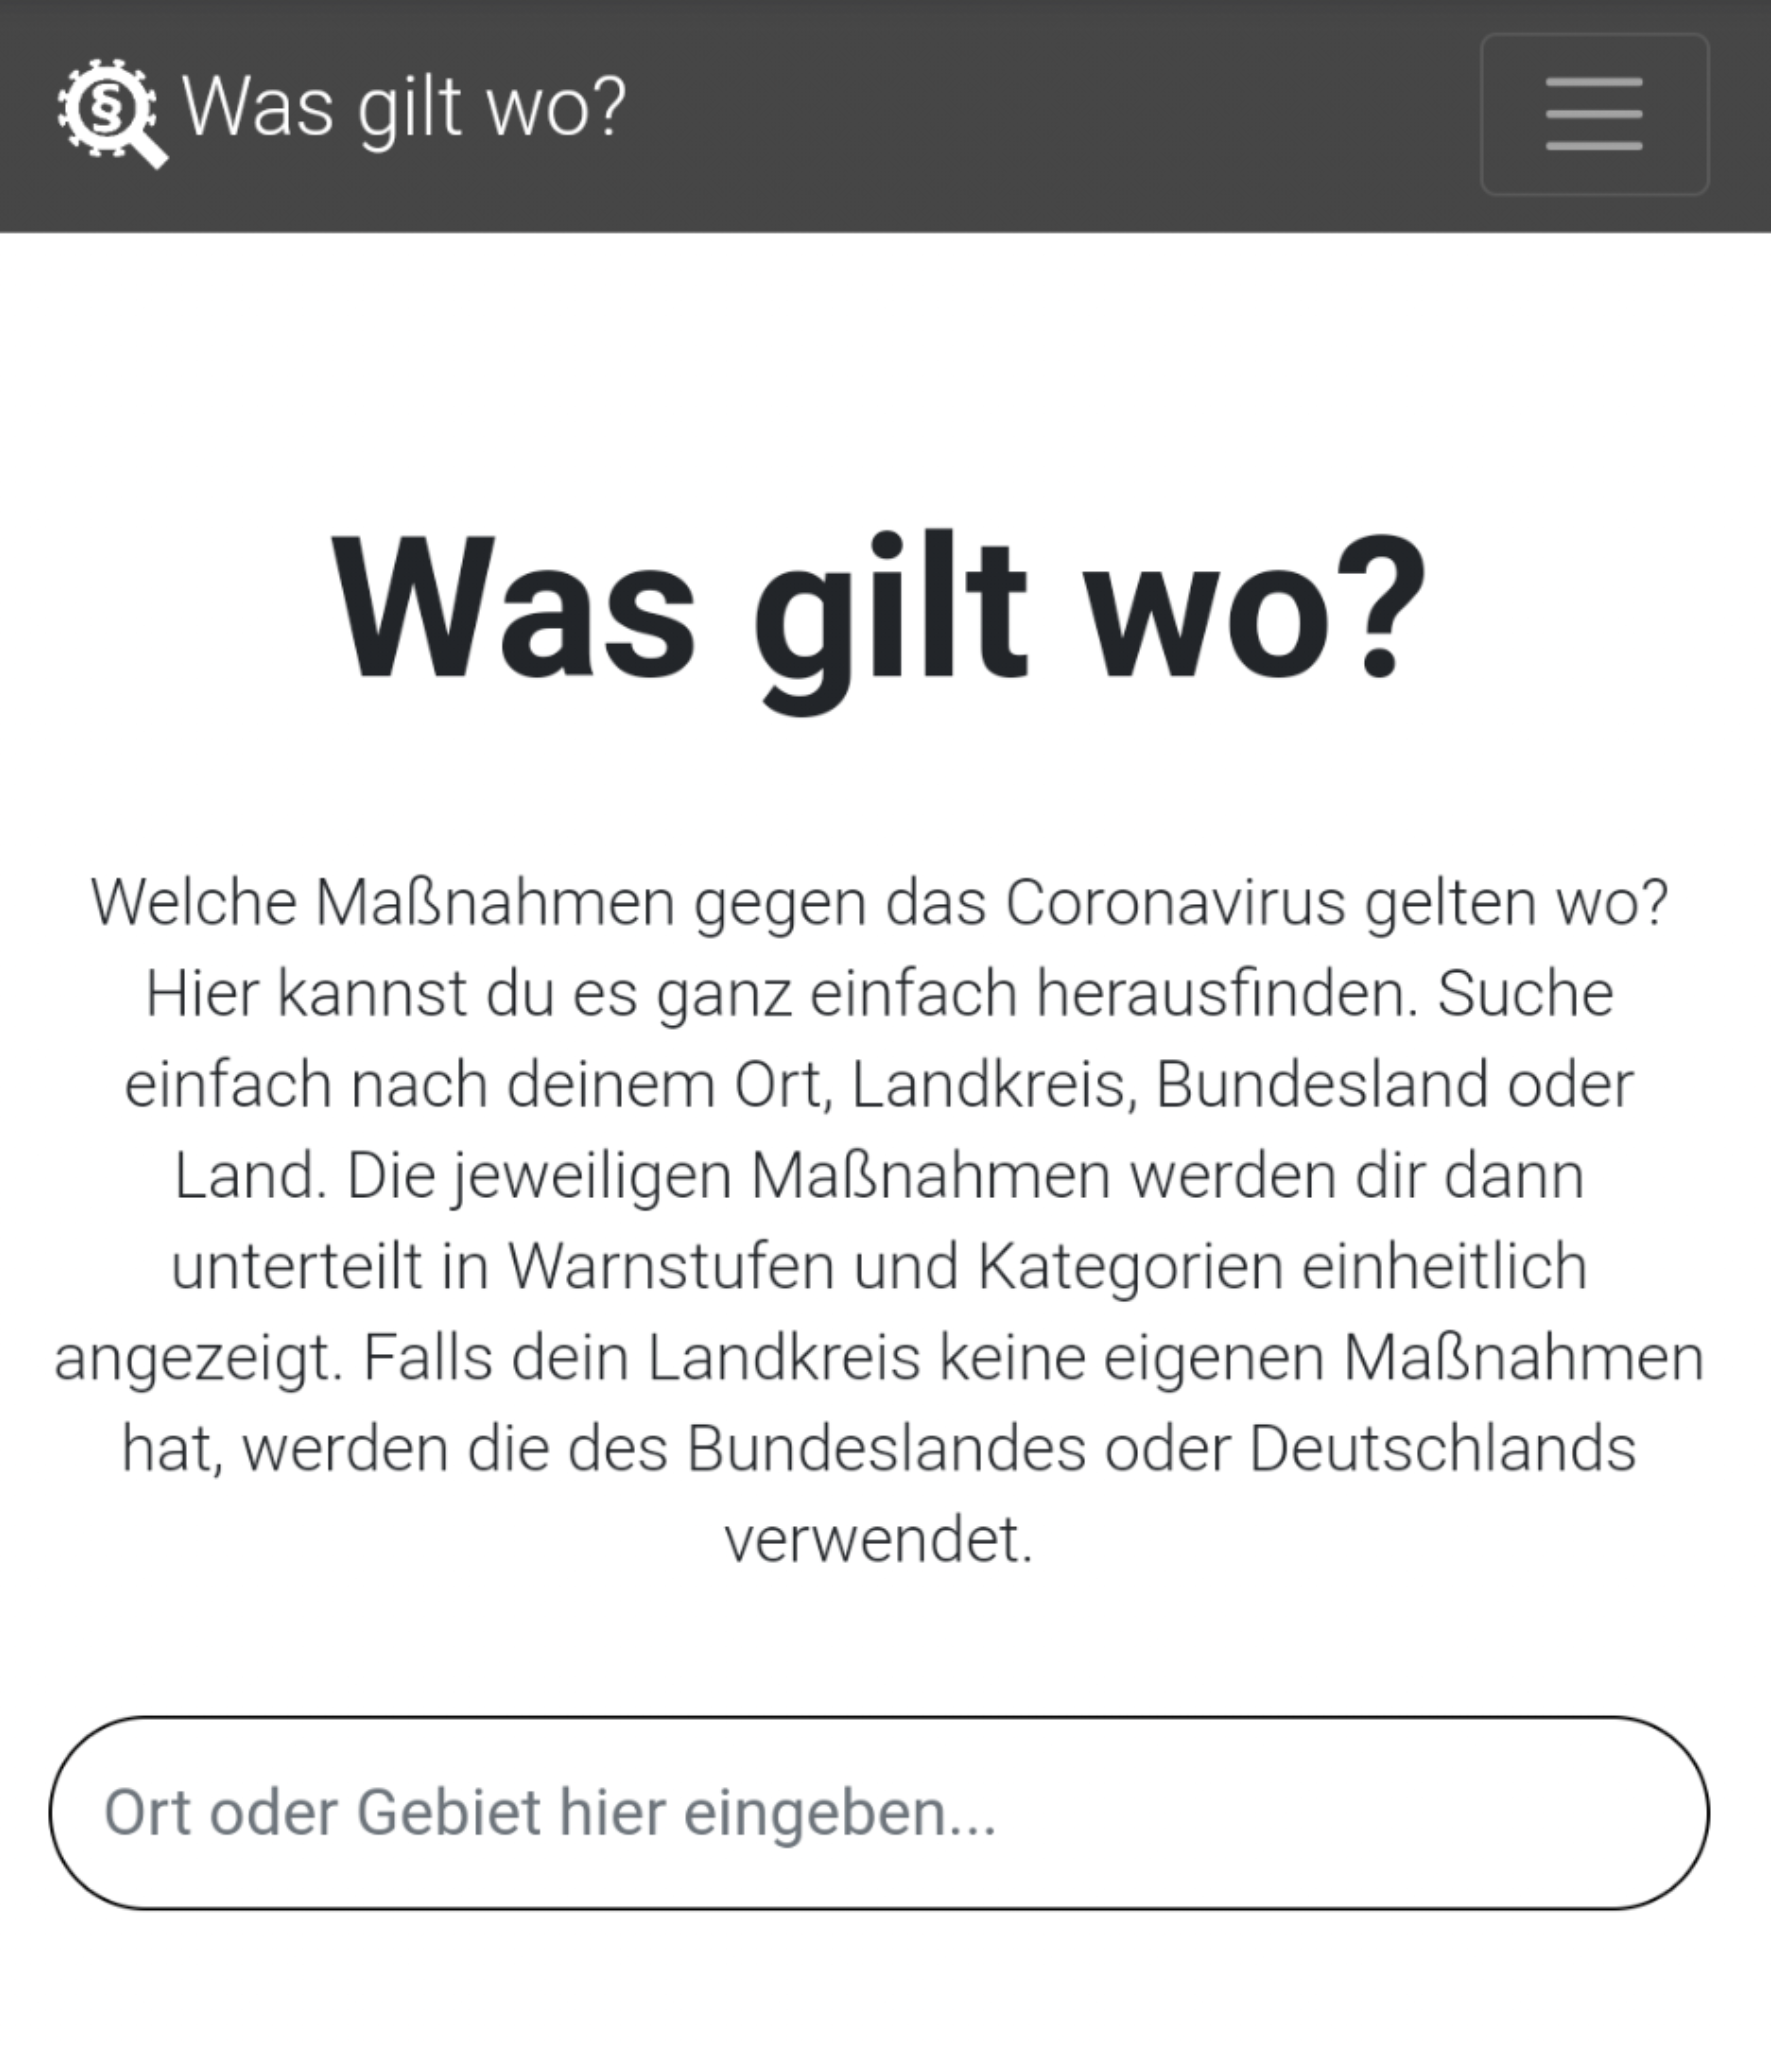 Was gilt wo / initiative from Augsburg / Background